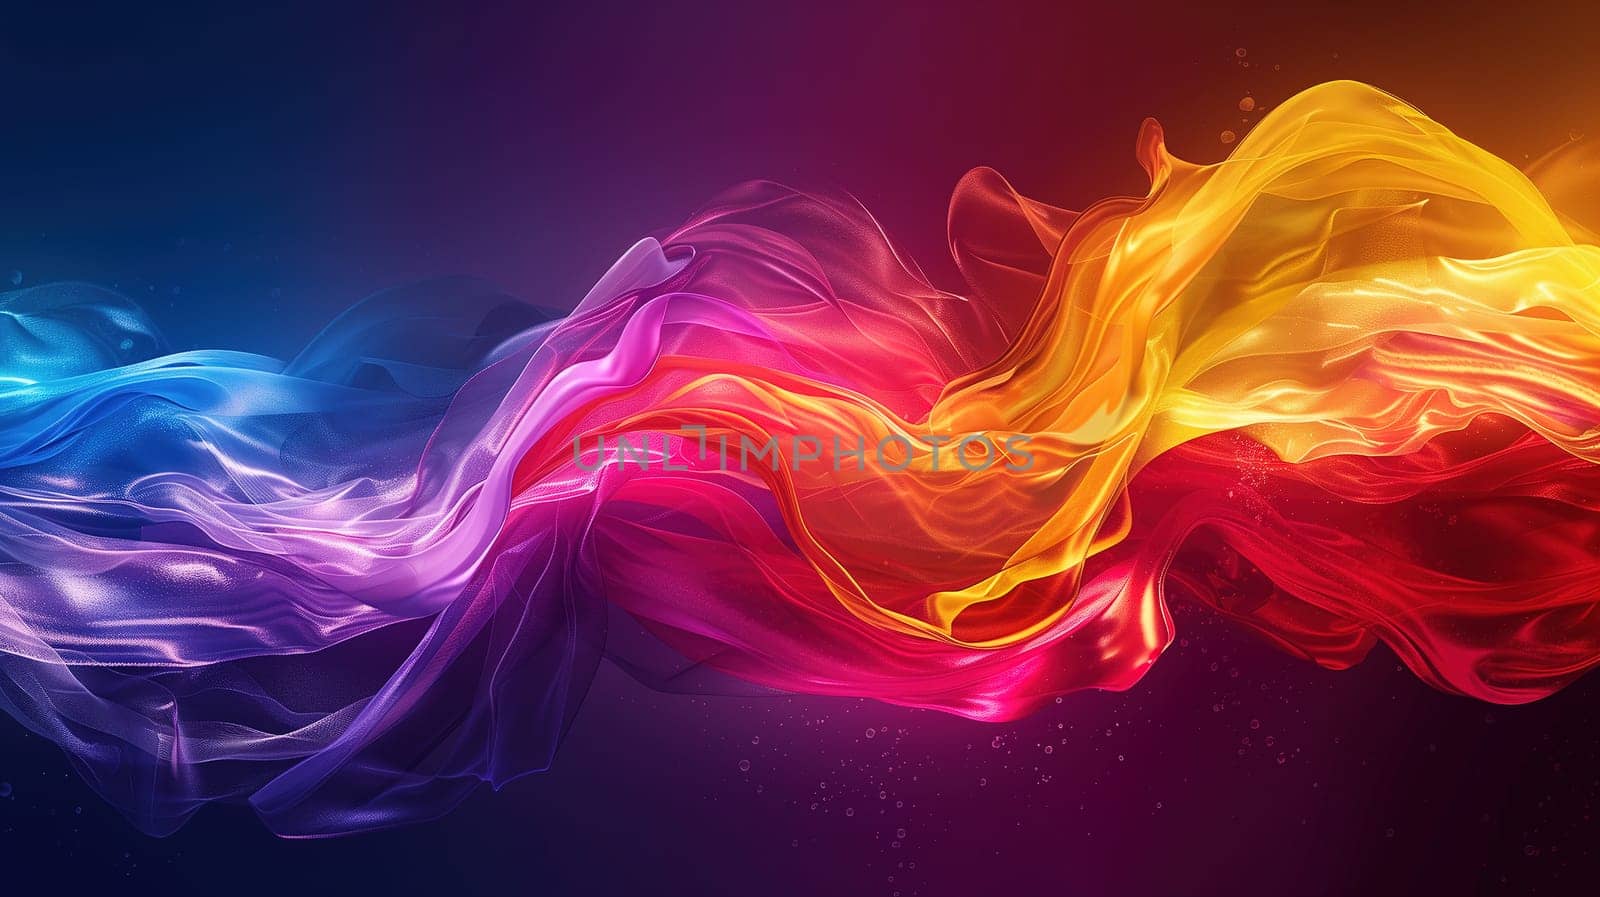 A dynamic and colorful display of smoke curls in the hues of the rainbow, gracefully moving across a shadowy backdrop, exemplifying the diversity and unity of the LGBT community. The bold colors merge and dance in an evocative display of pride and solidarity.